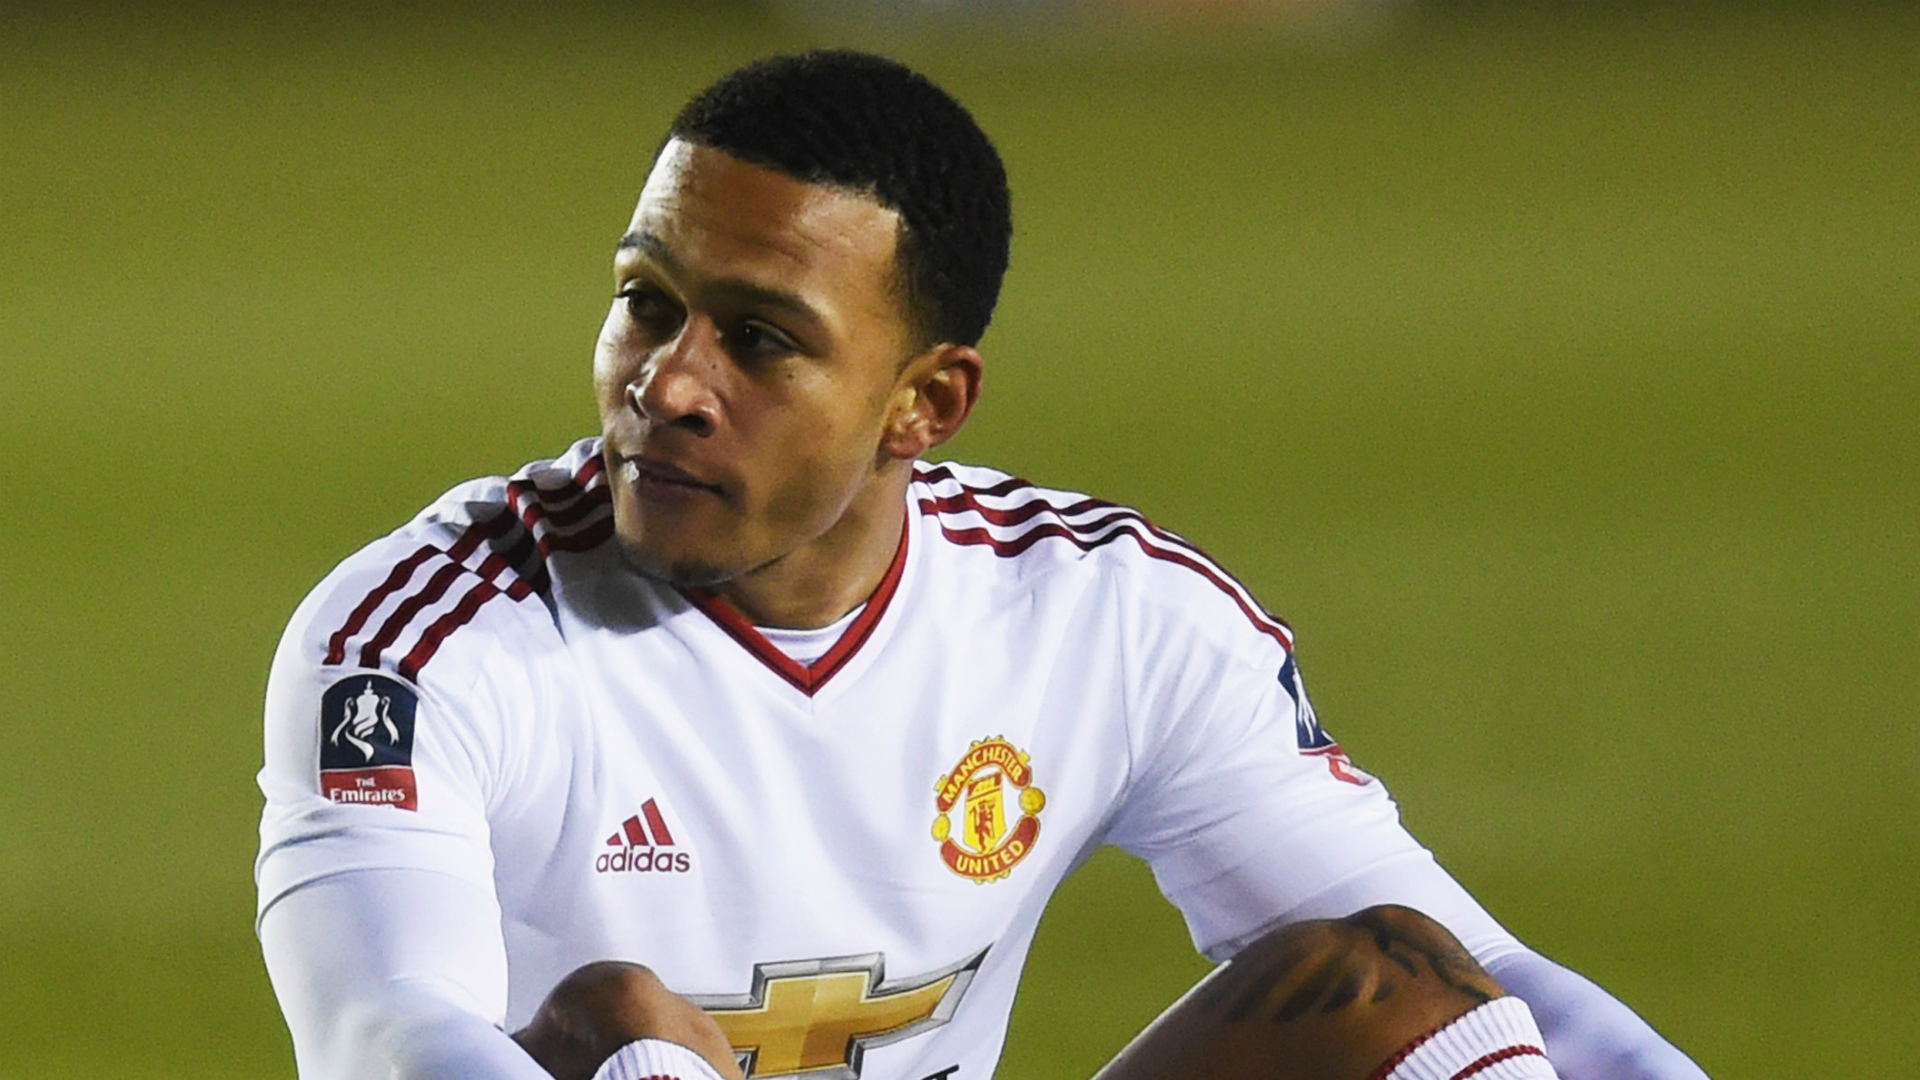 RUMORS: Man Utd flop Memphis Depay to reject Marseille switch